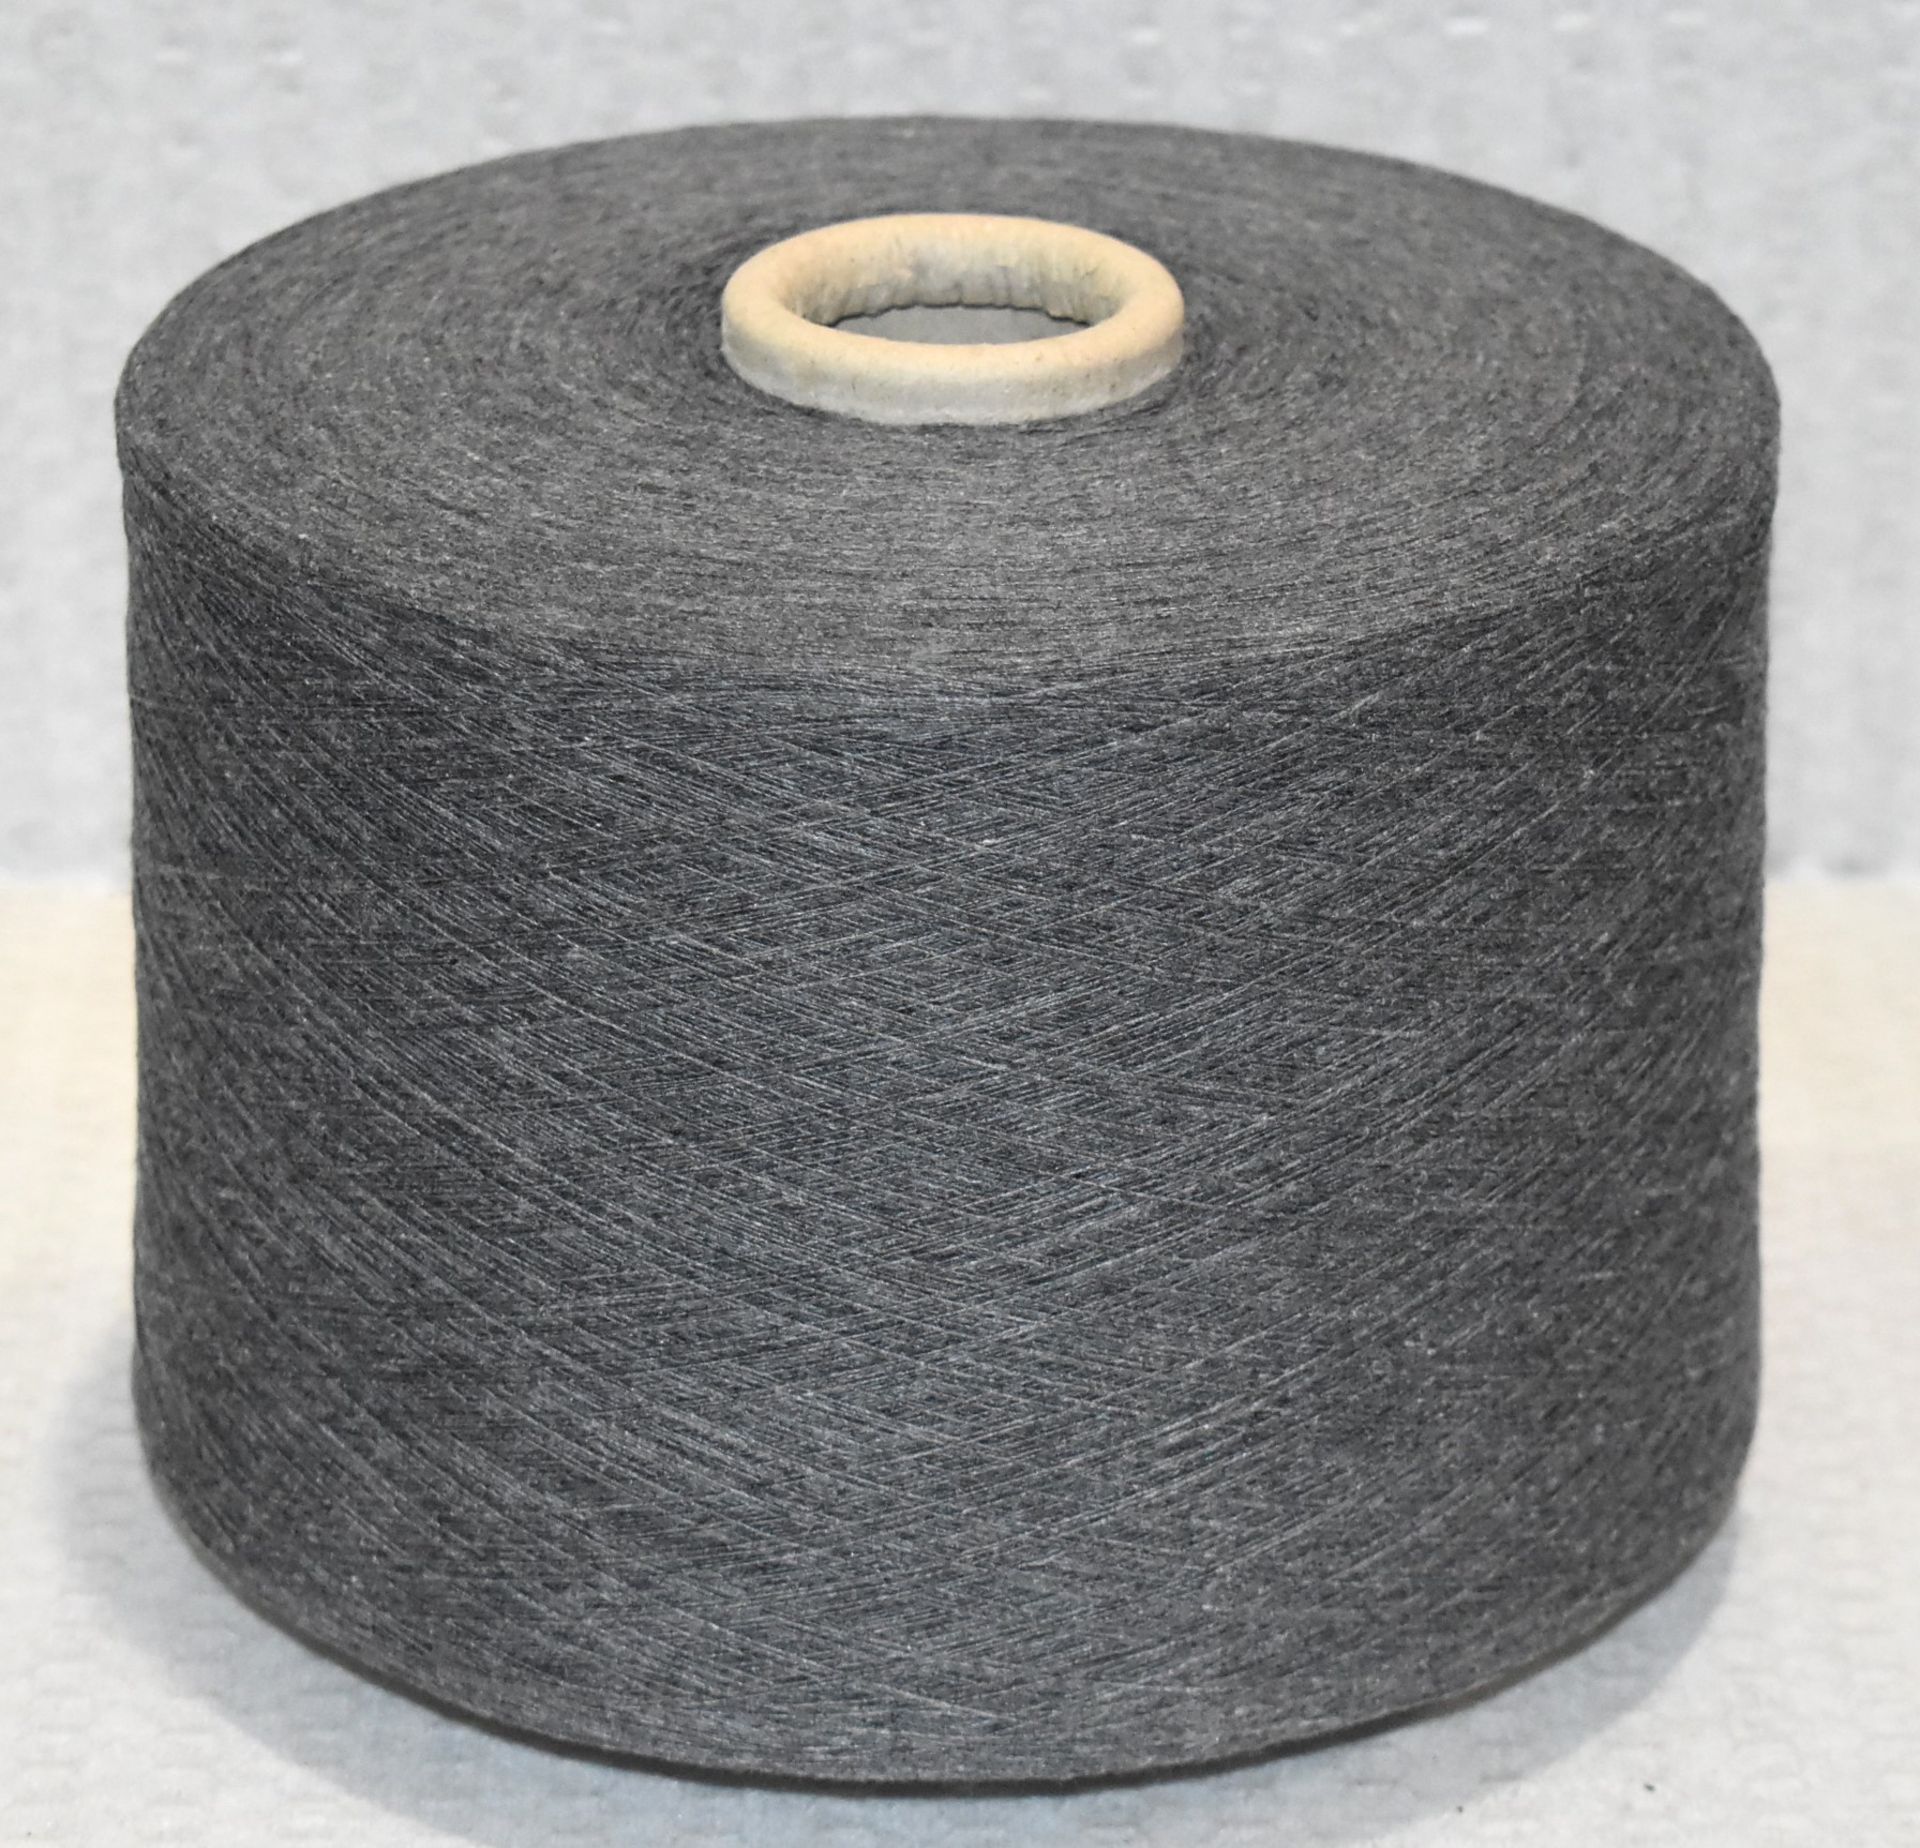 4 x Cones of 1/13 MicroCotton Knitting Yarn - Mid Grey - Approx Weight: 2,500g - New Stock ABL Yarn - Image 4 of 17